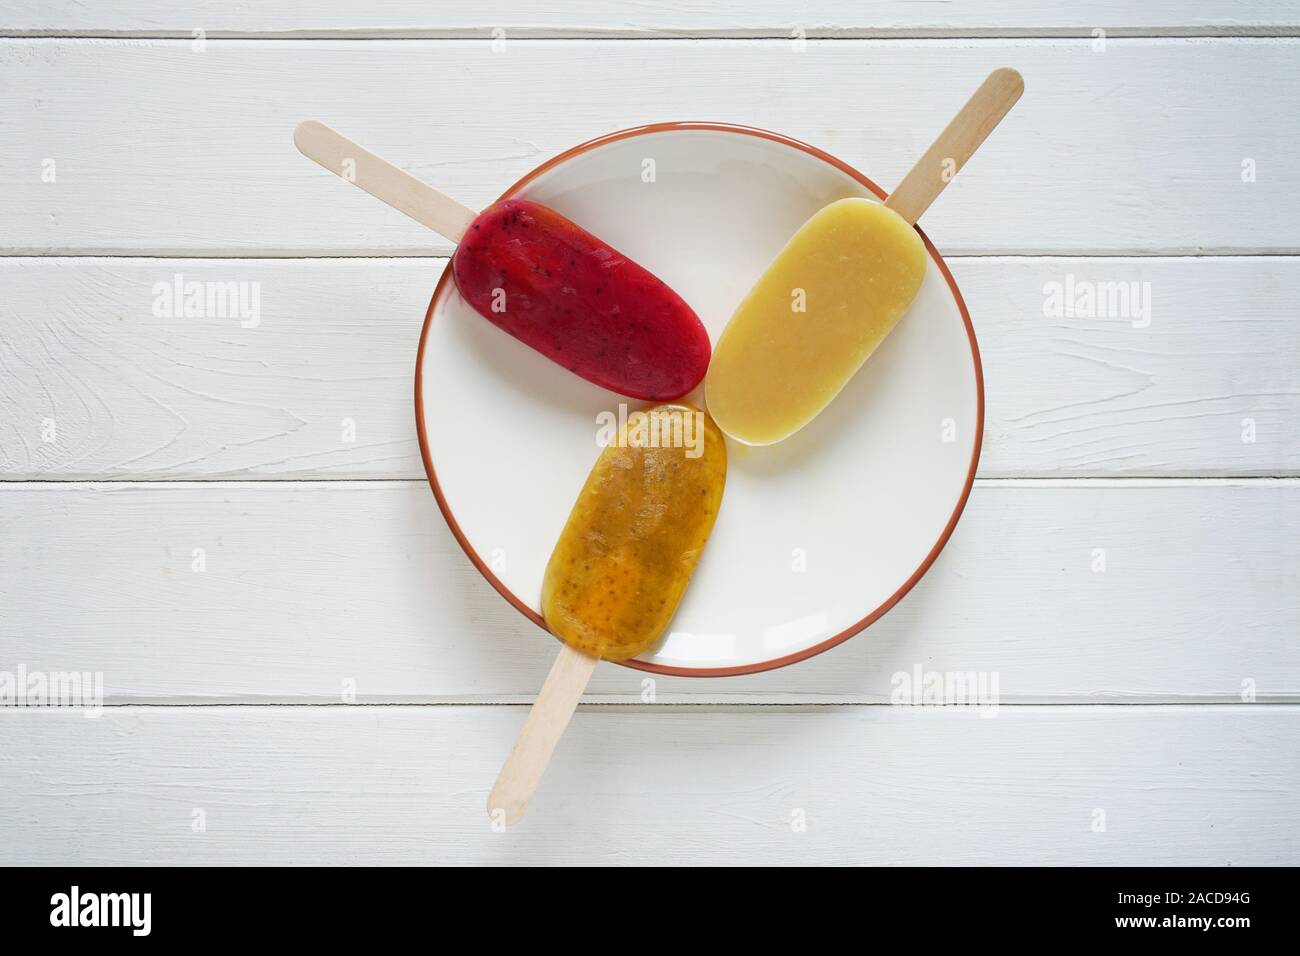 overhead view of three different fruit smoothie popsicles or ice pops on a plate on white wooden background Stock Photo